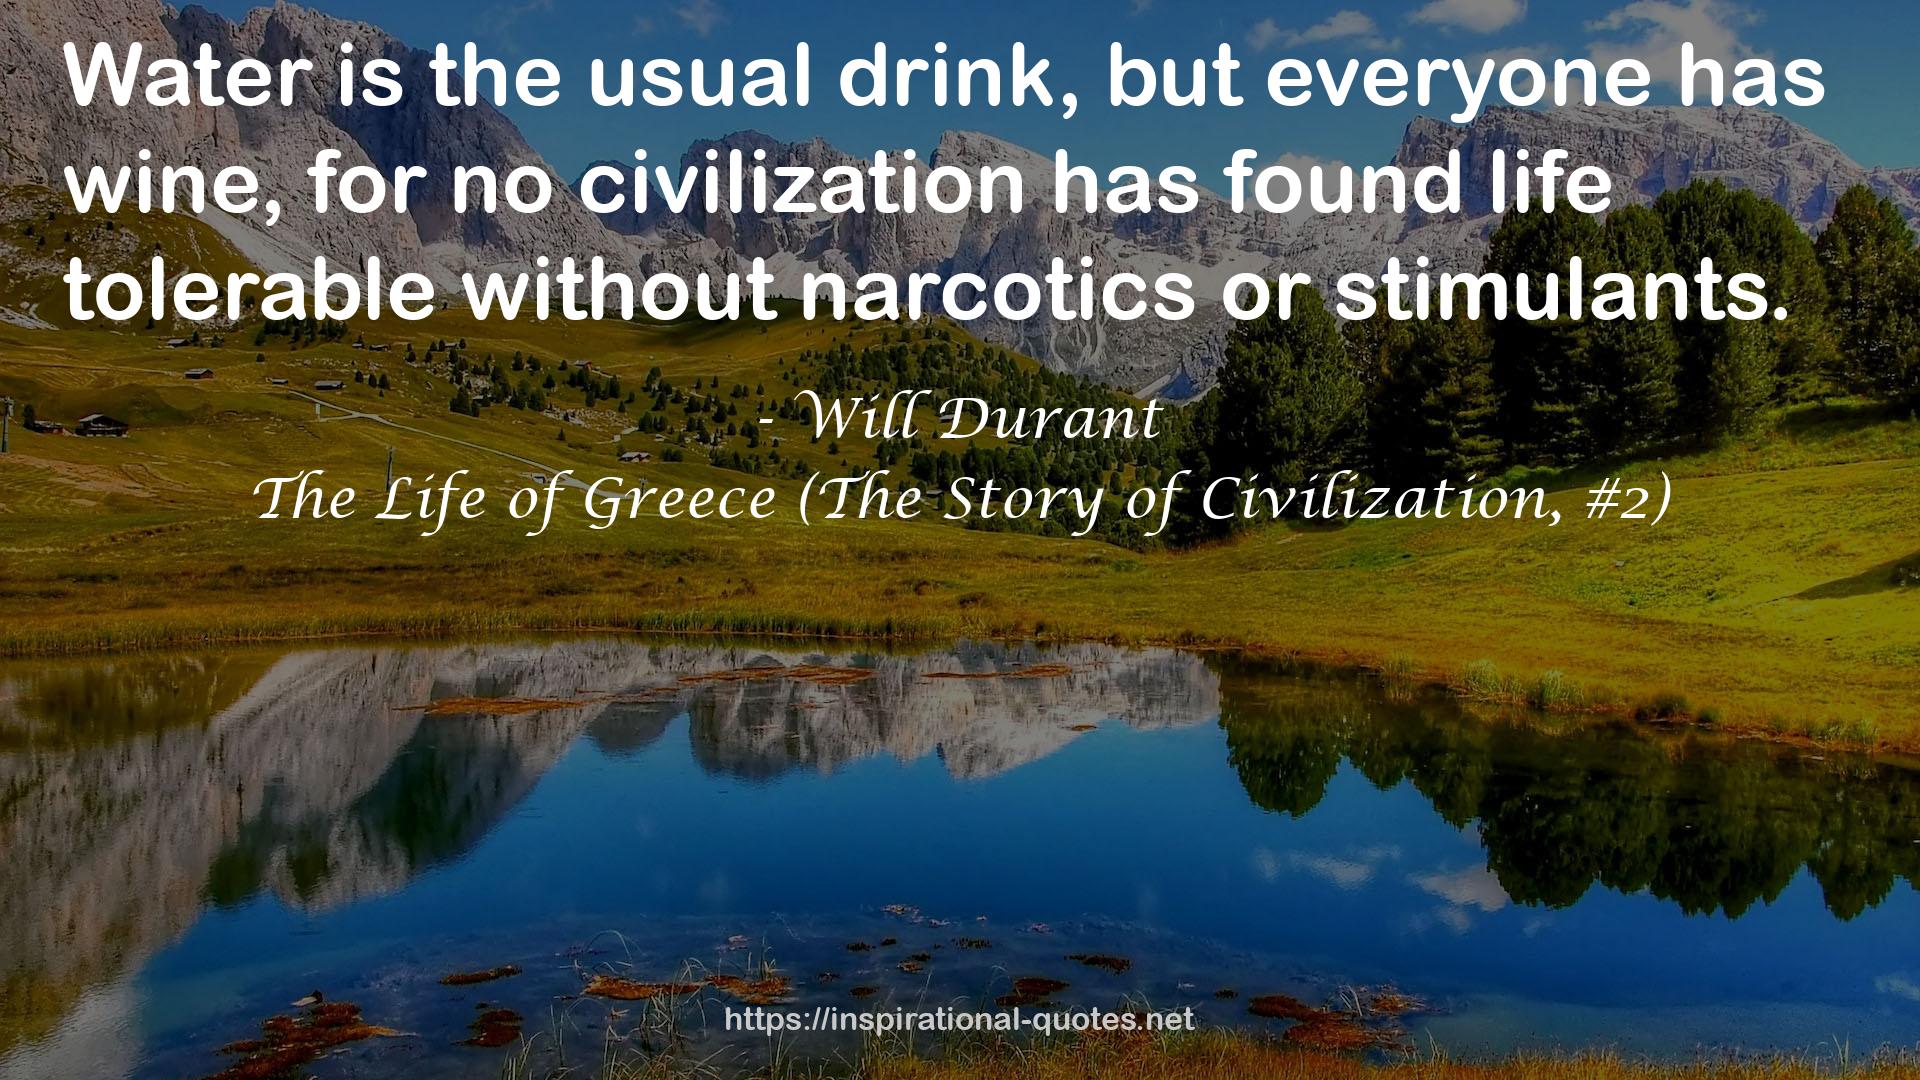 The Life of Greece (The Story of Civilization, #2) QUOTES